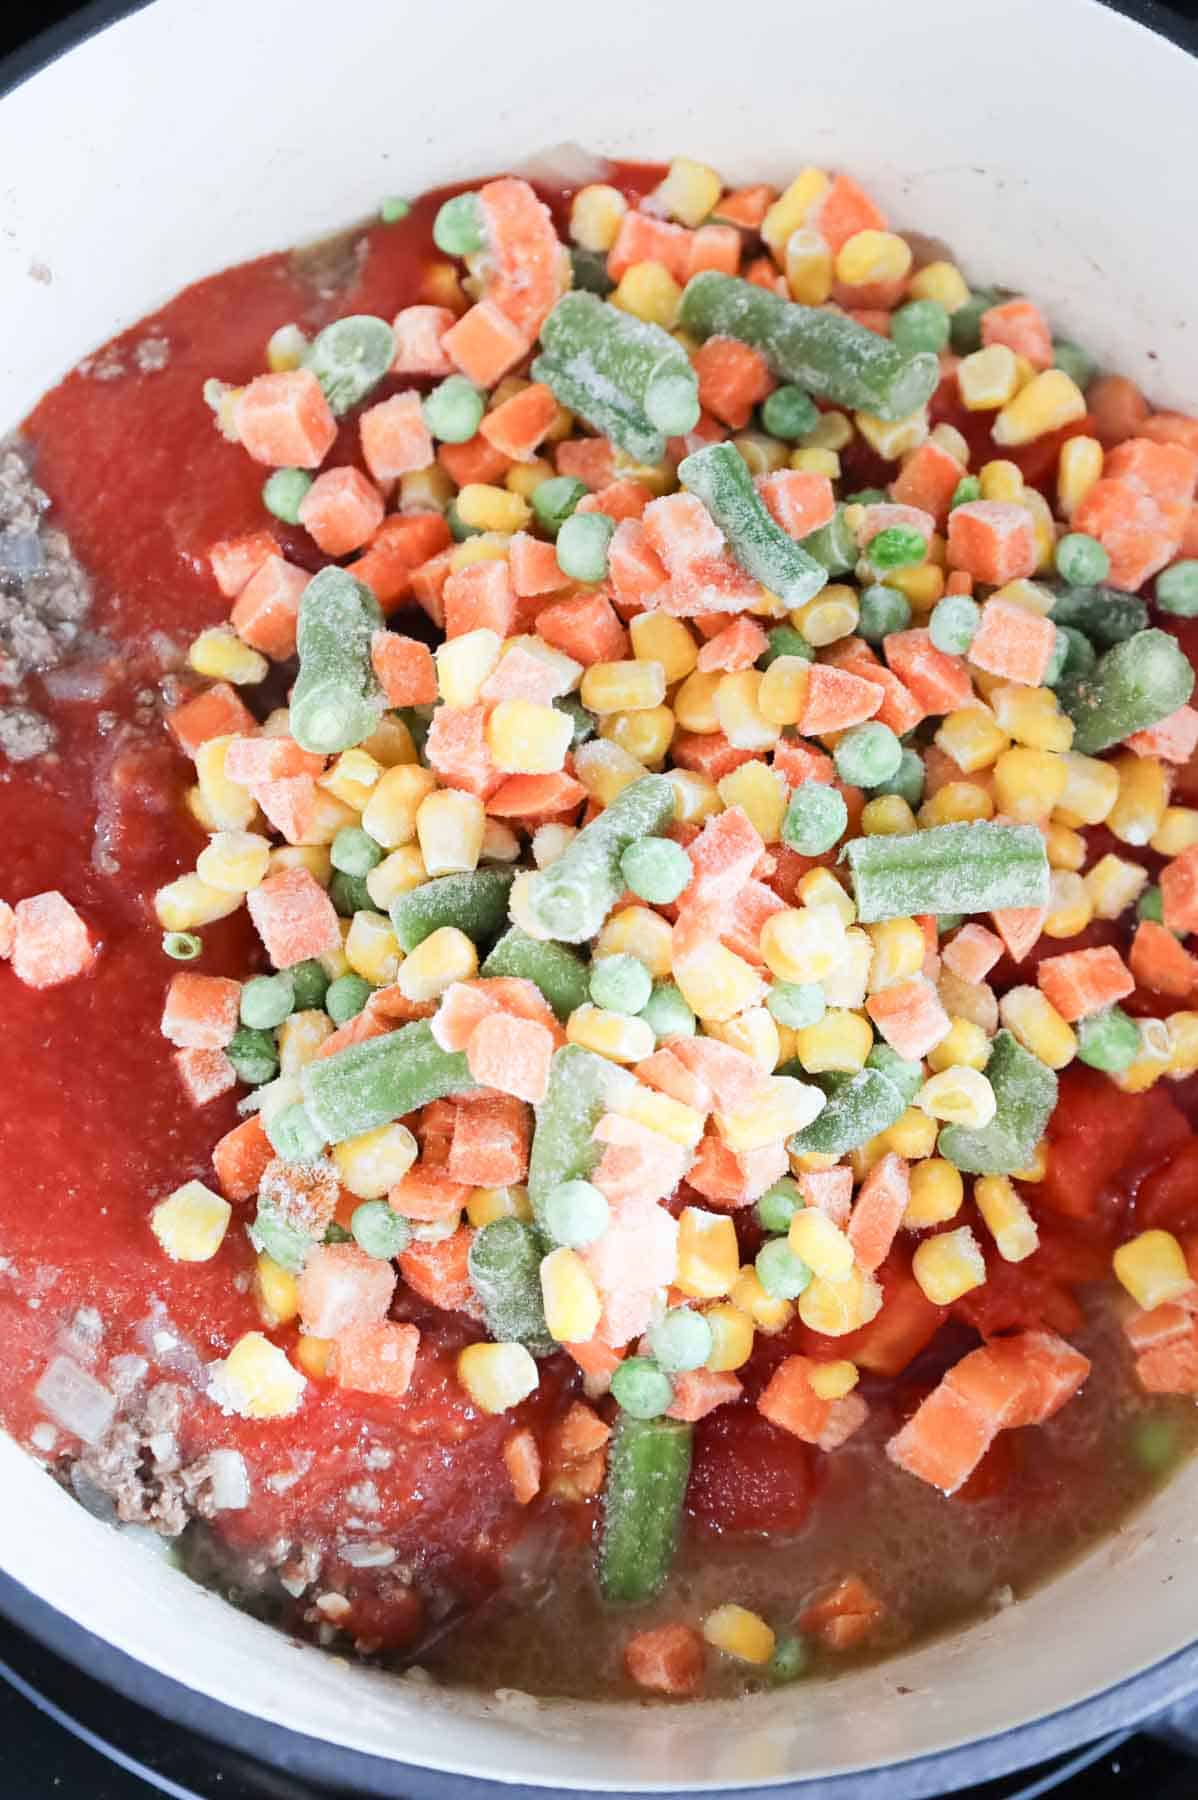 frozen mixed veggies added to pot with diced tomatoes, tomato sauce and cooked ground beef